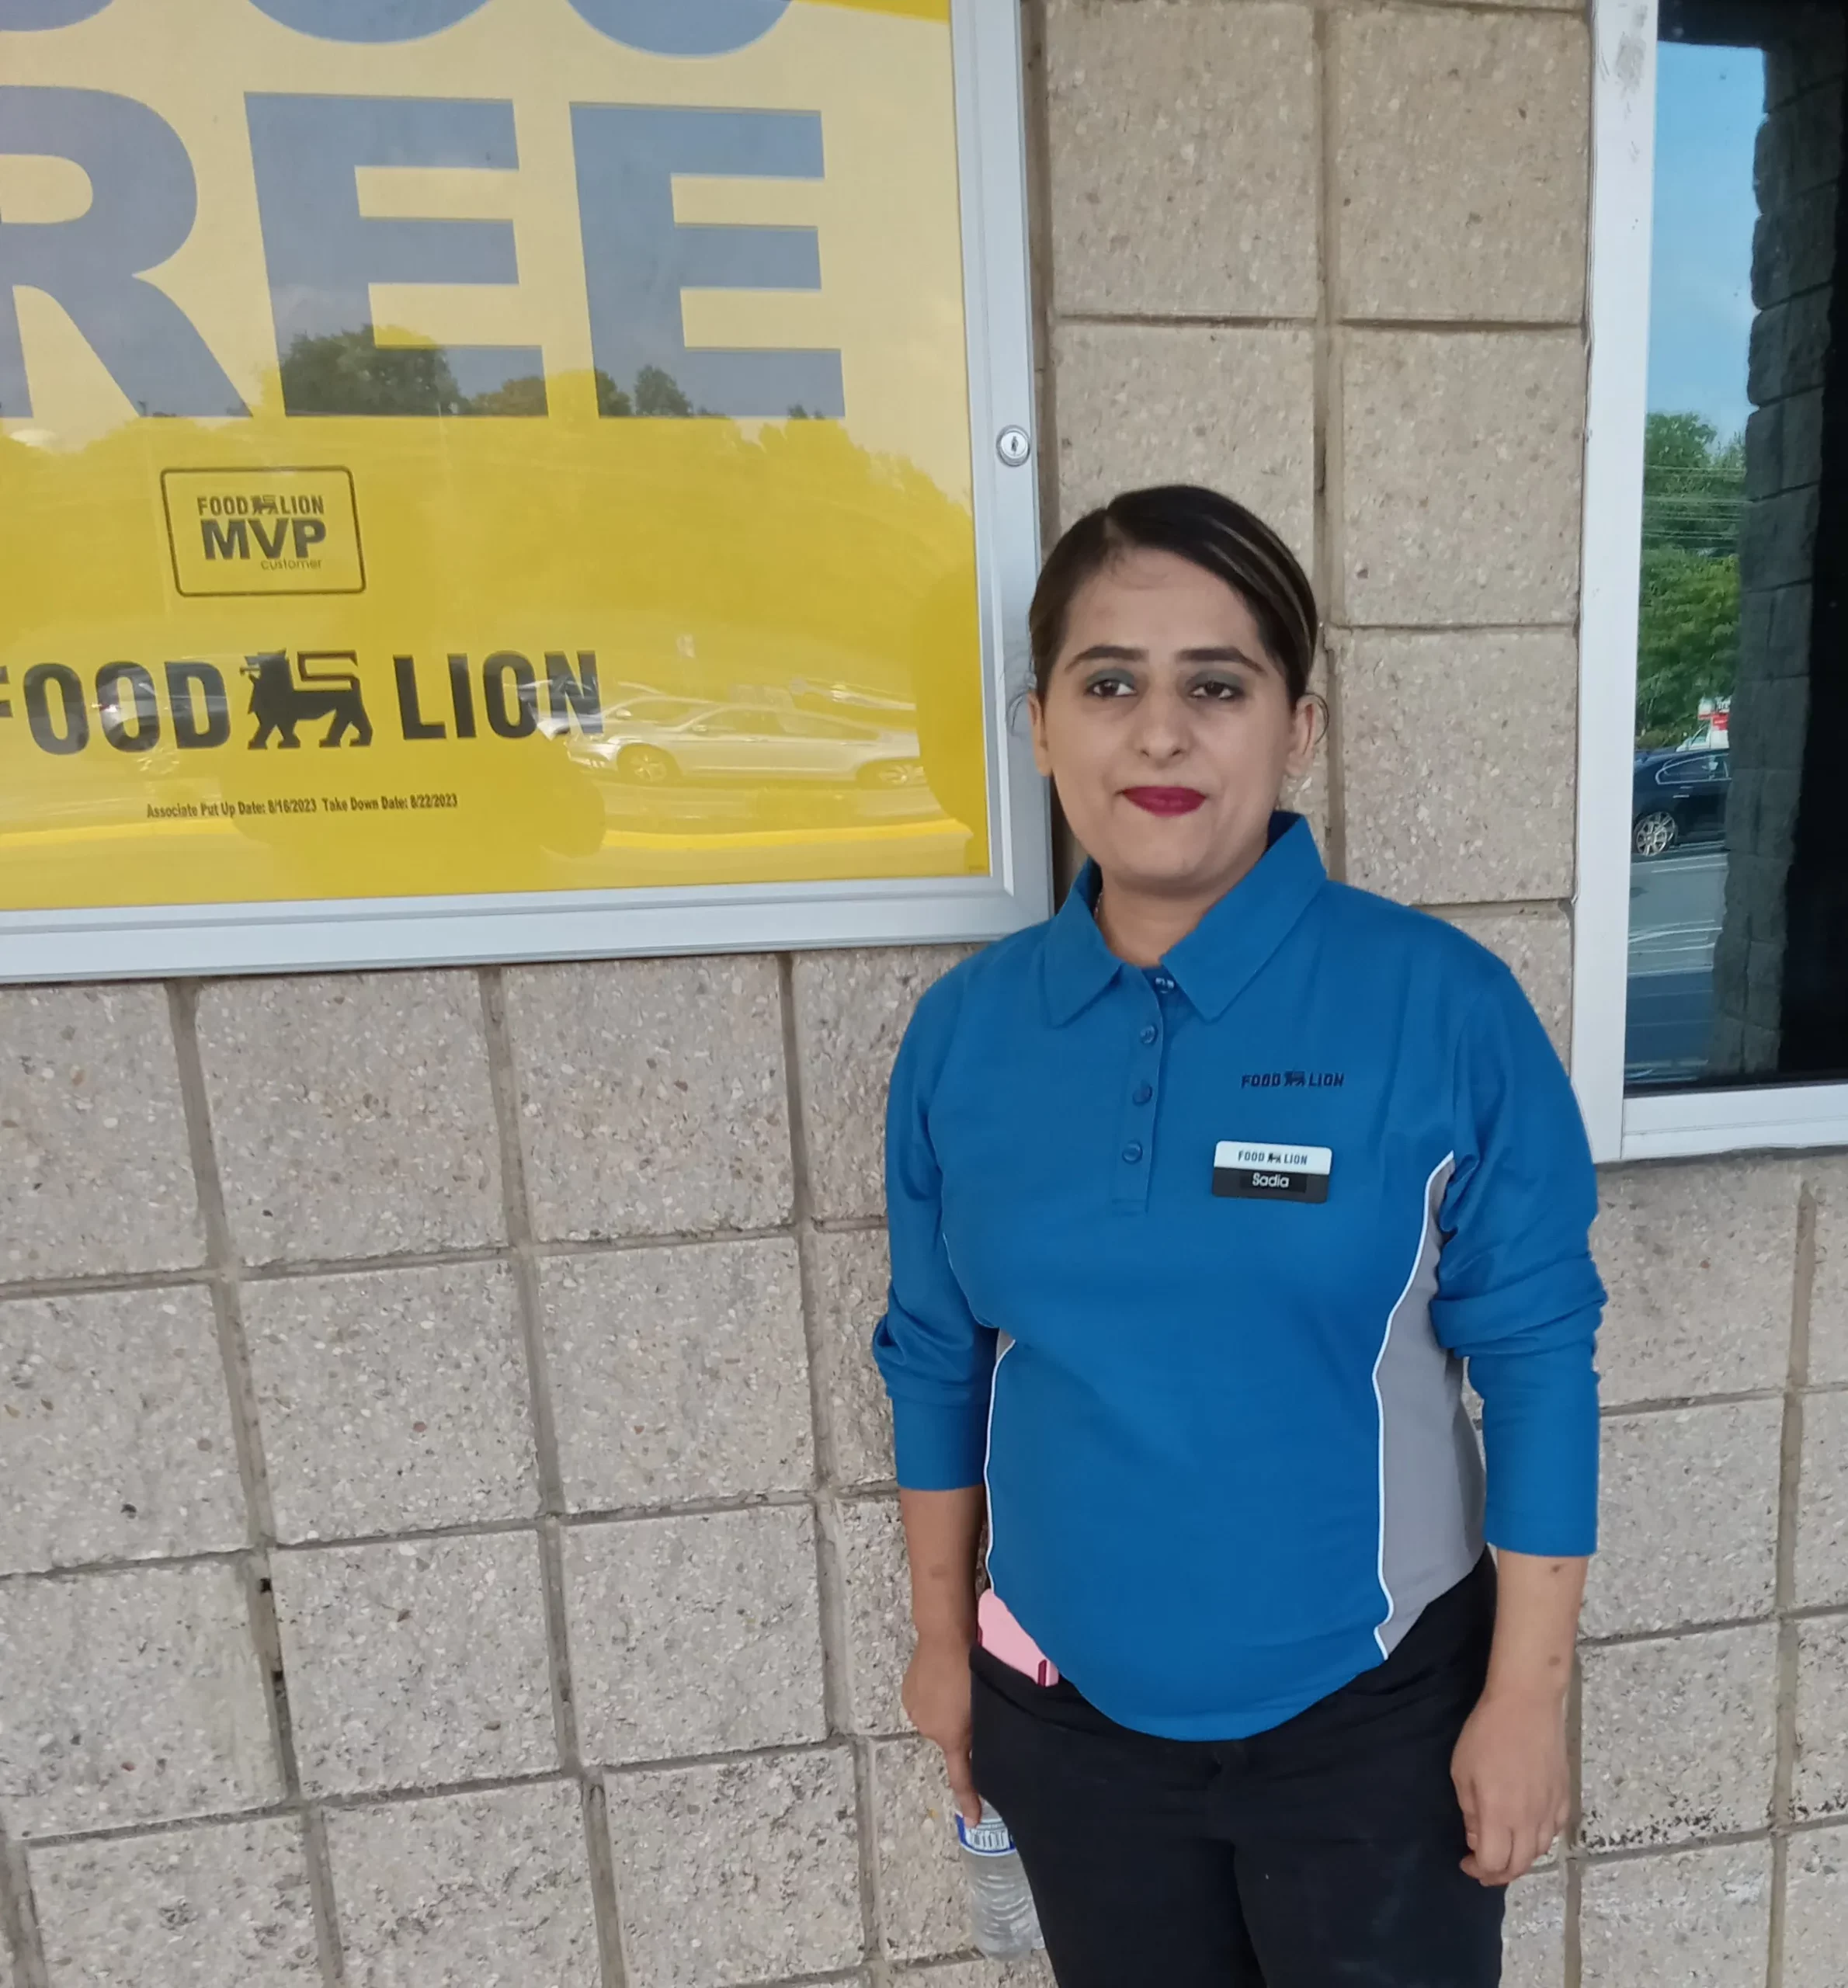 photo of woman in food lion uniform standing in front of food lion sign